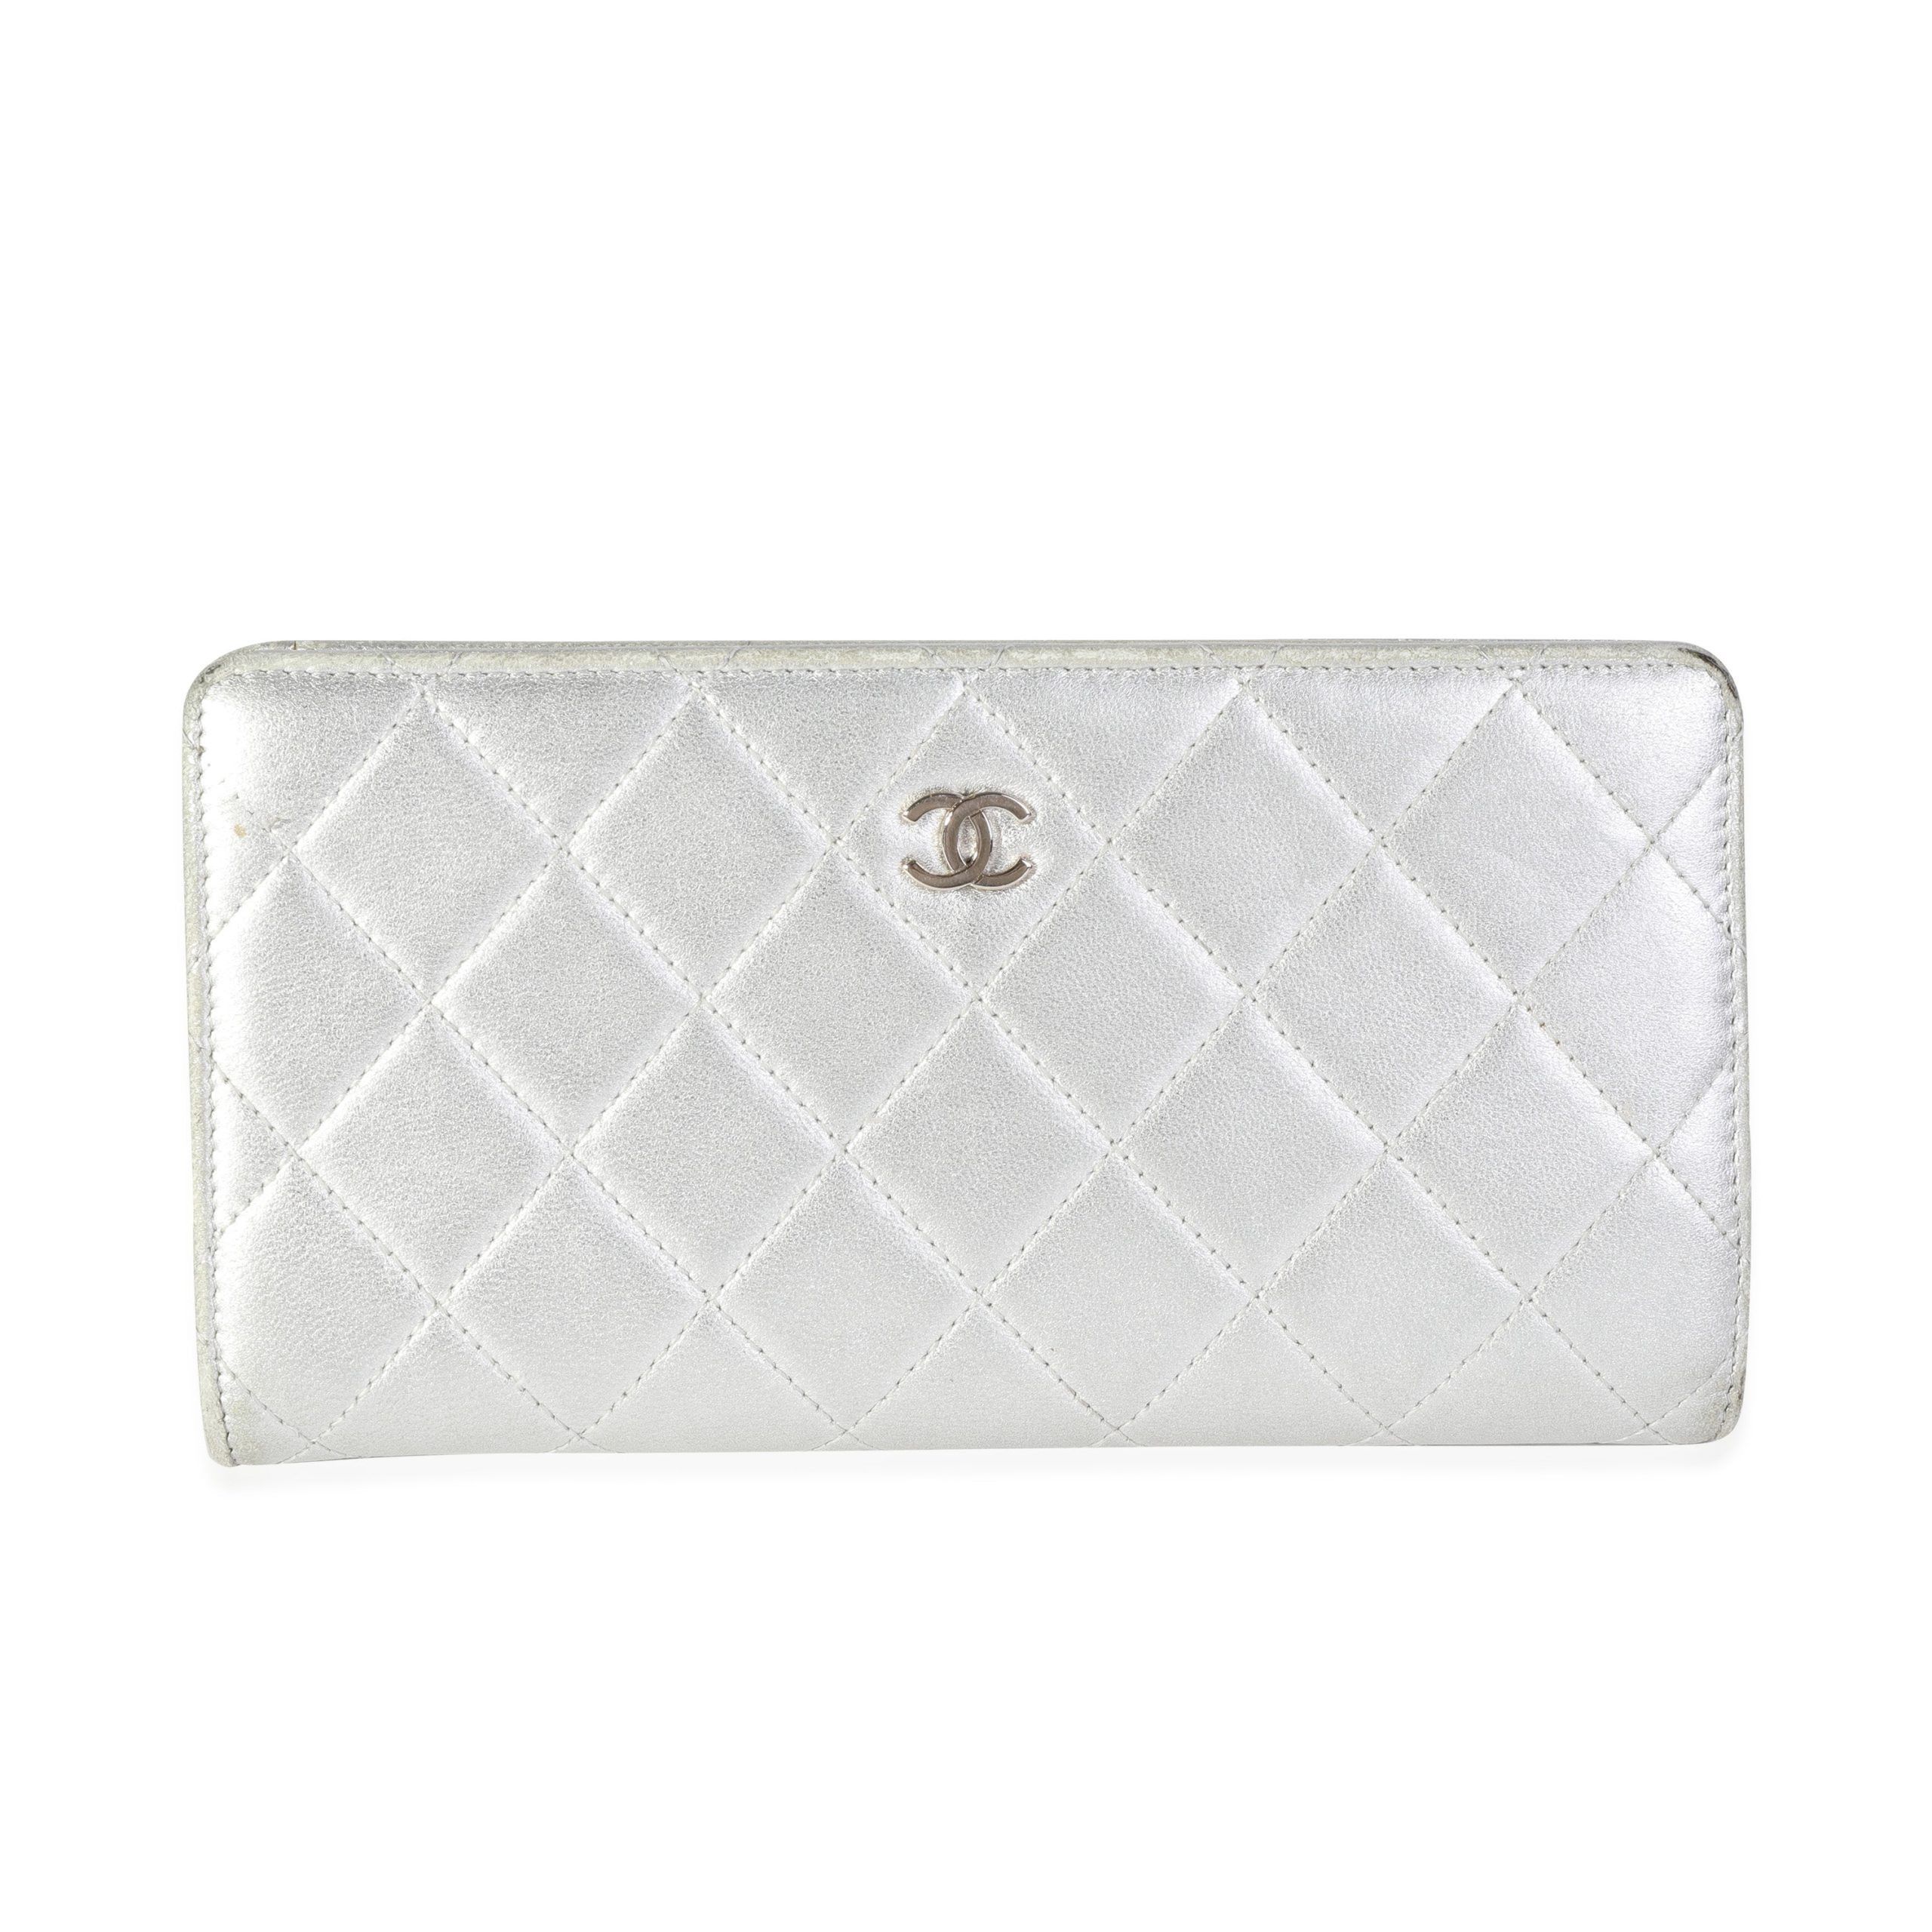 Chanel Chanel Metallic Silver Quilted Lambskin Leather CC L-Yen Wallet Size ONE SIZE - 3 Thumbnail